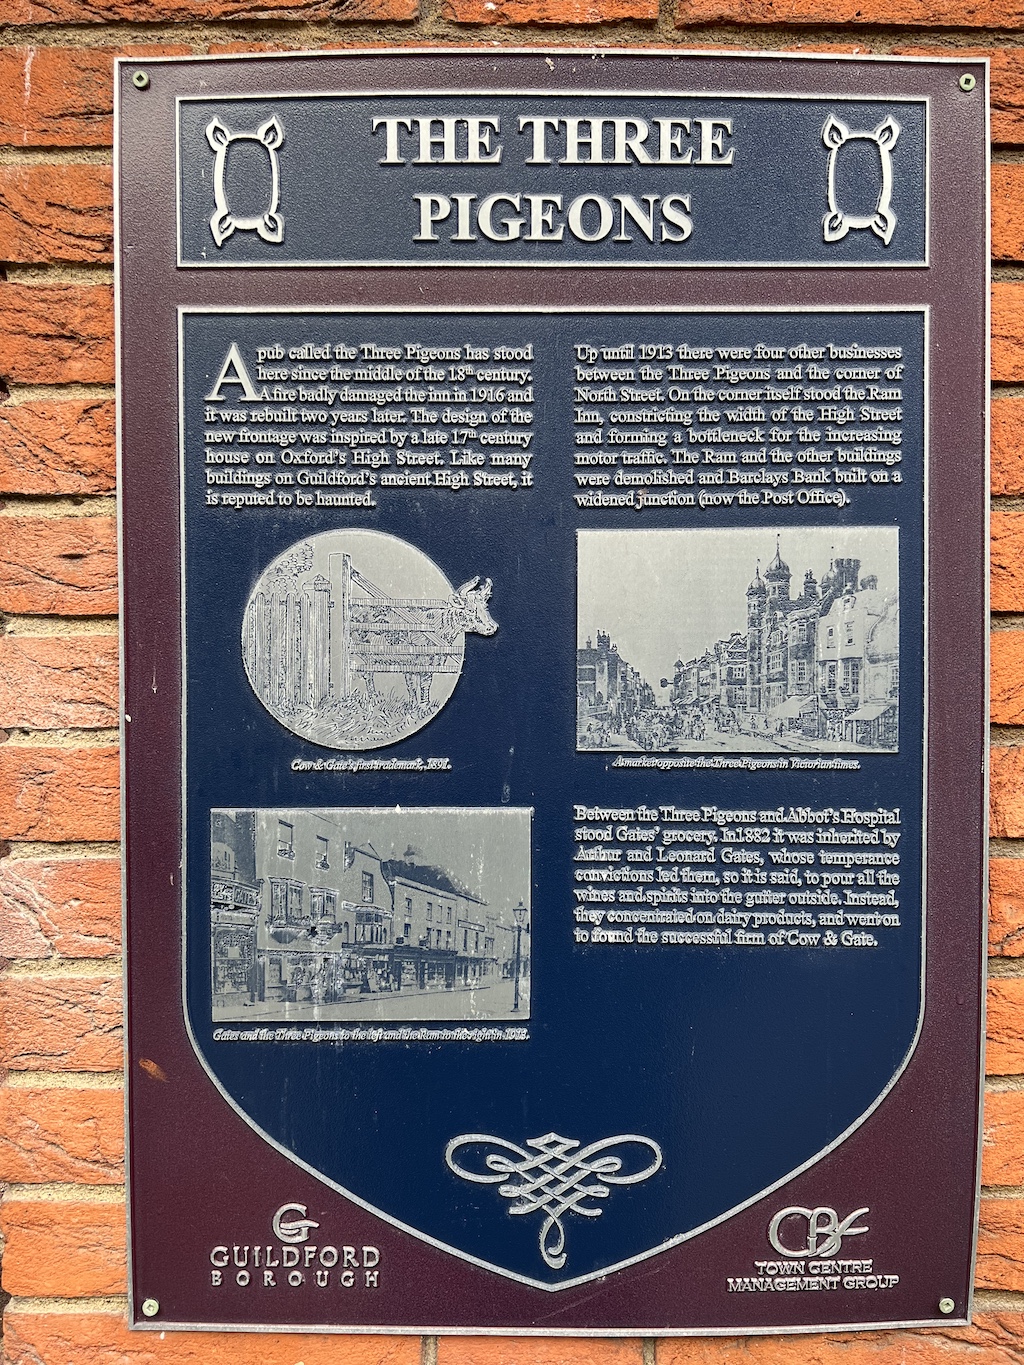 Blue plaque in Guildford for the Three Pigeons